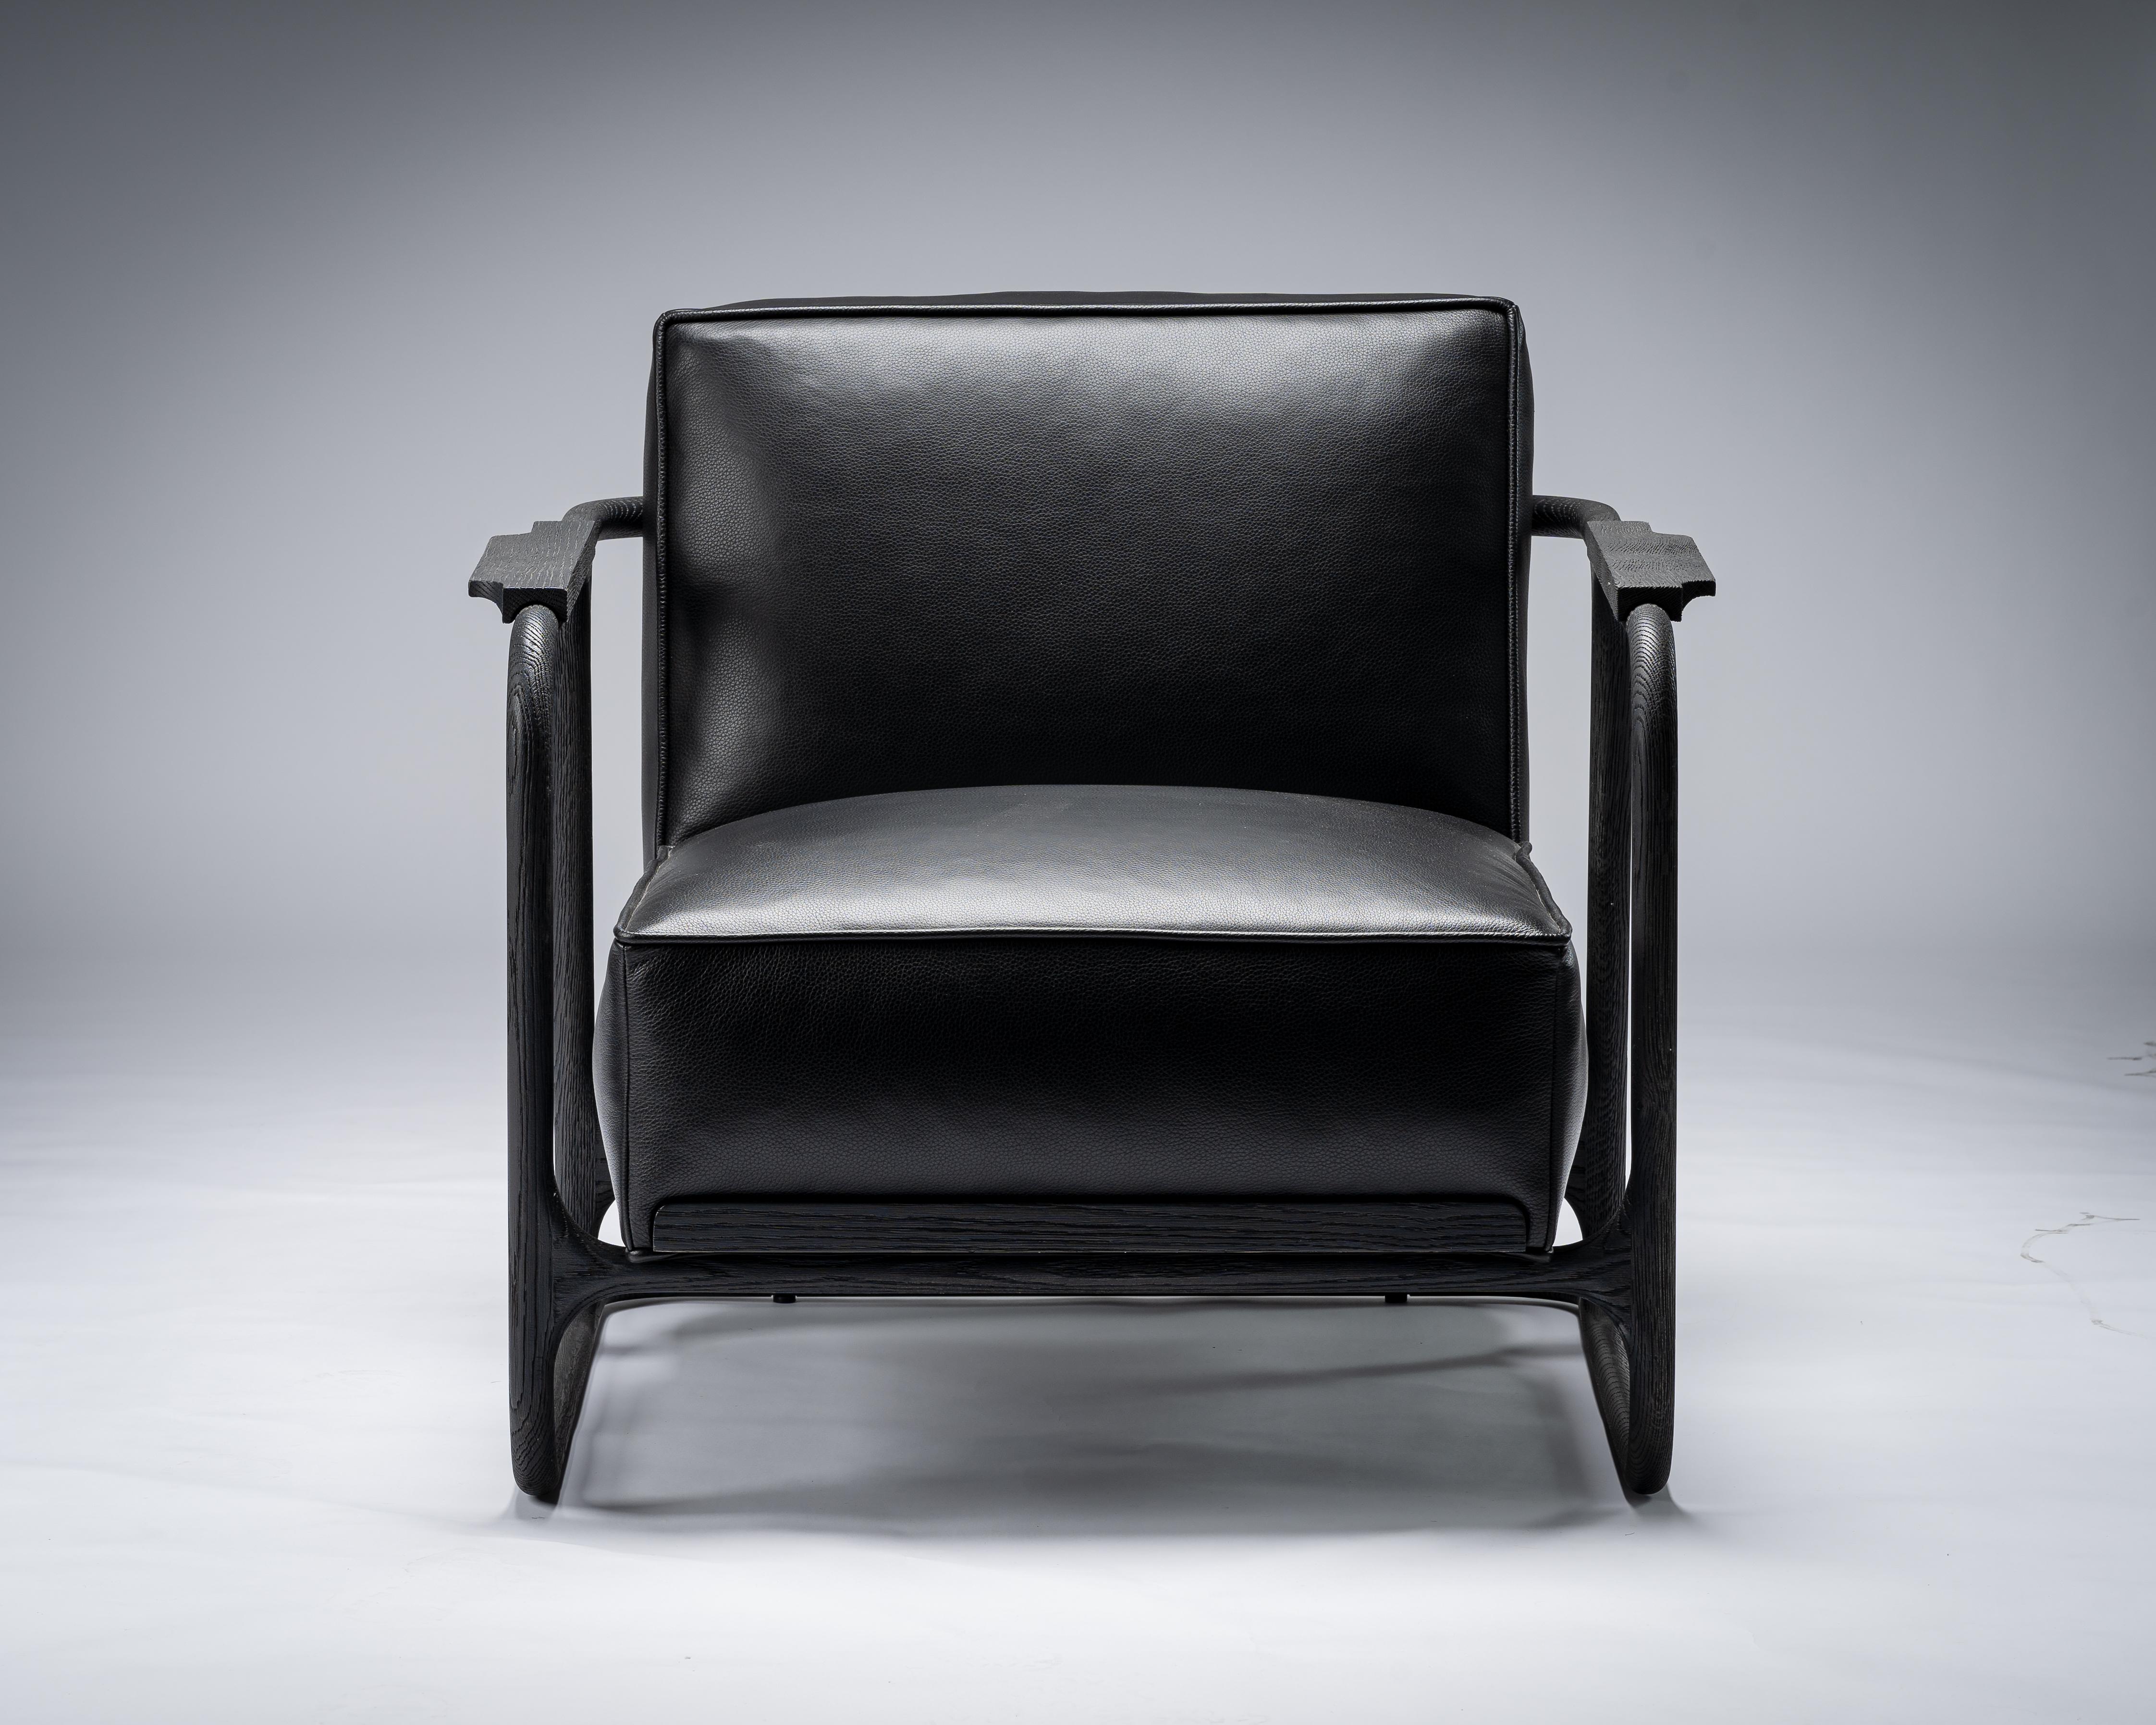 ALFRED black chair by Mandy Graham

ALFRED
A01, chair lounge armchair
Walnut / sandblasted oak and leather
Measures: 33.75